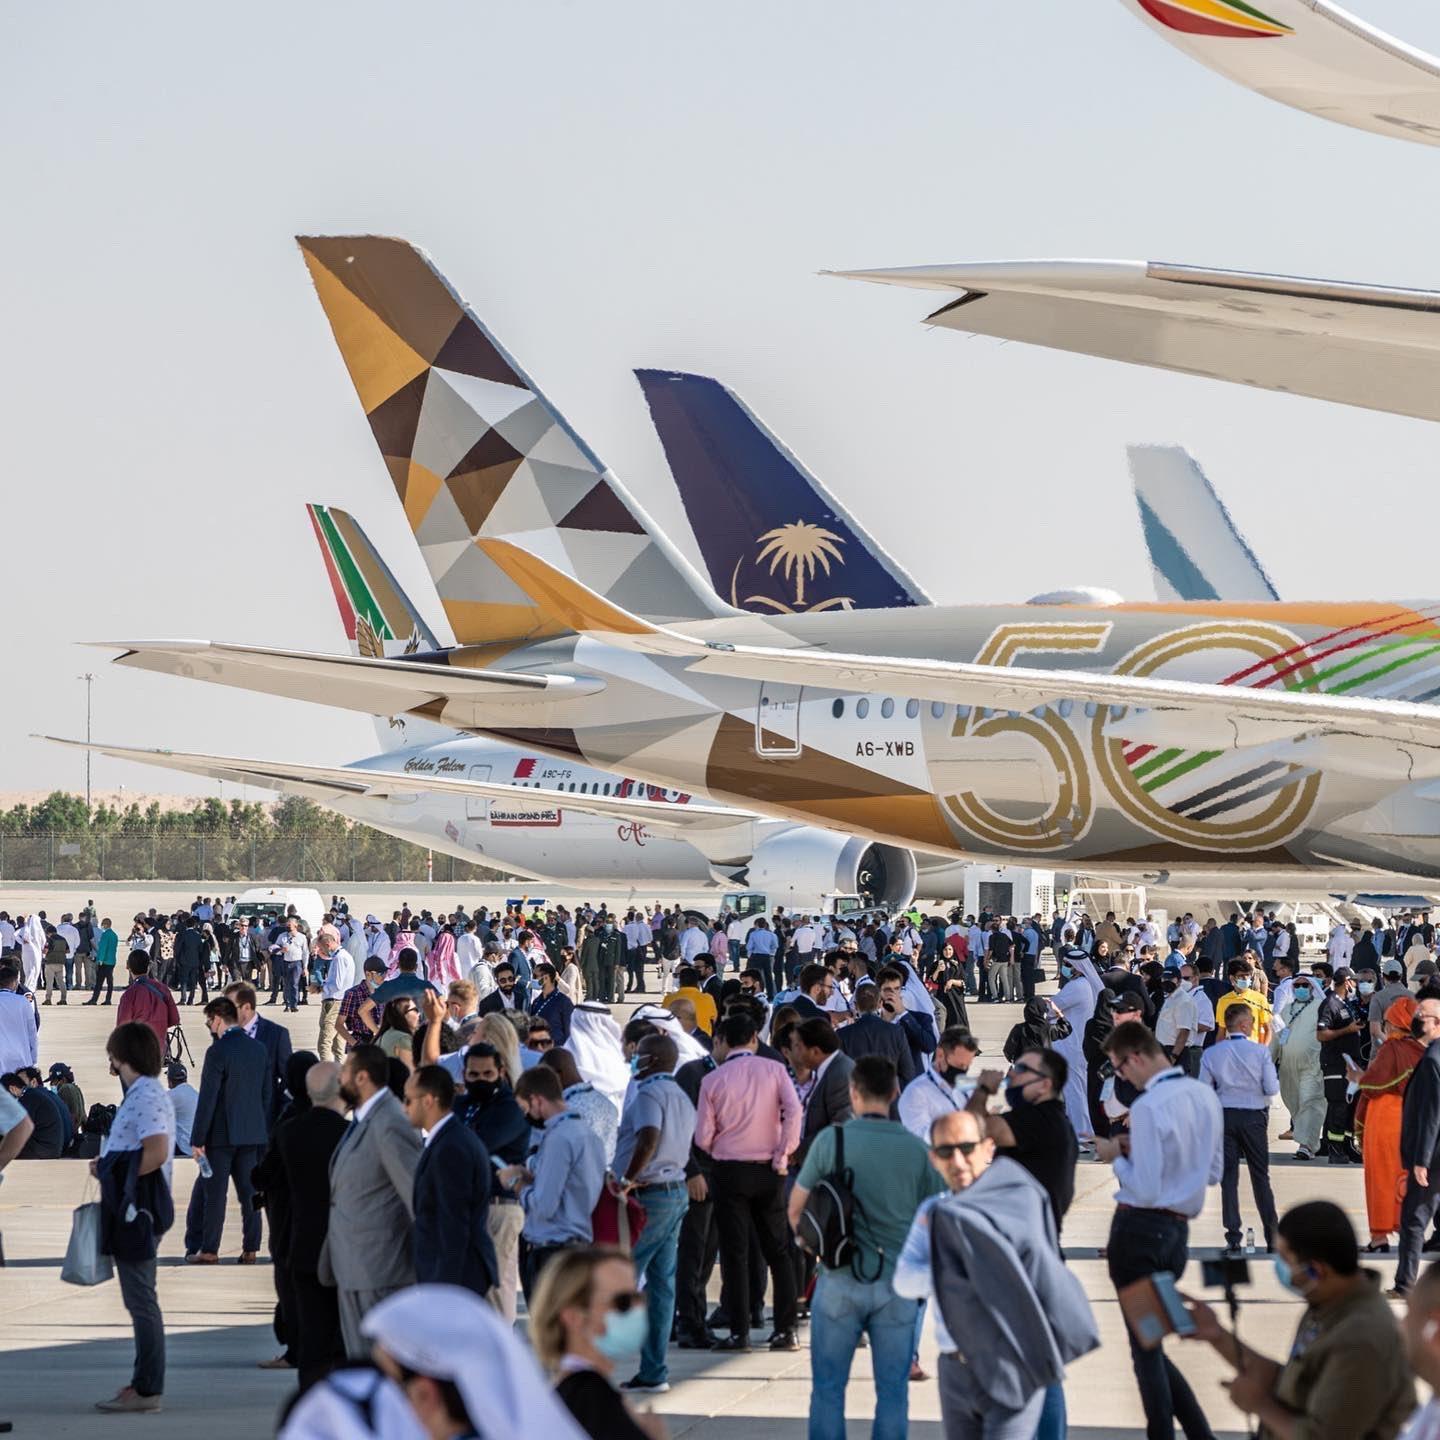 Dubai Airshow 2021: Budget airline expects to start flights to Indian subcontinent in 2022